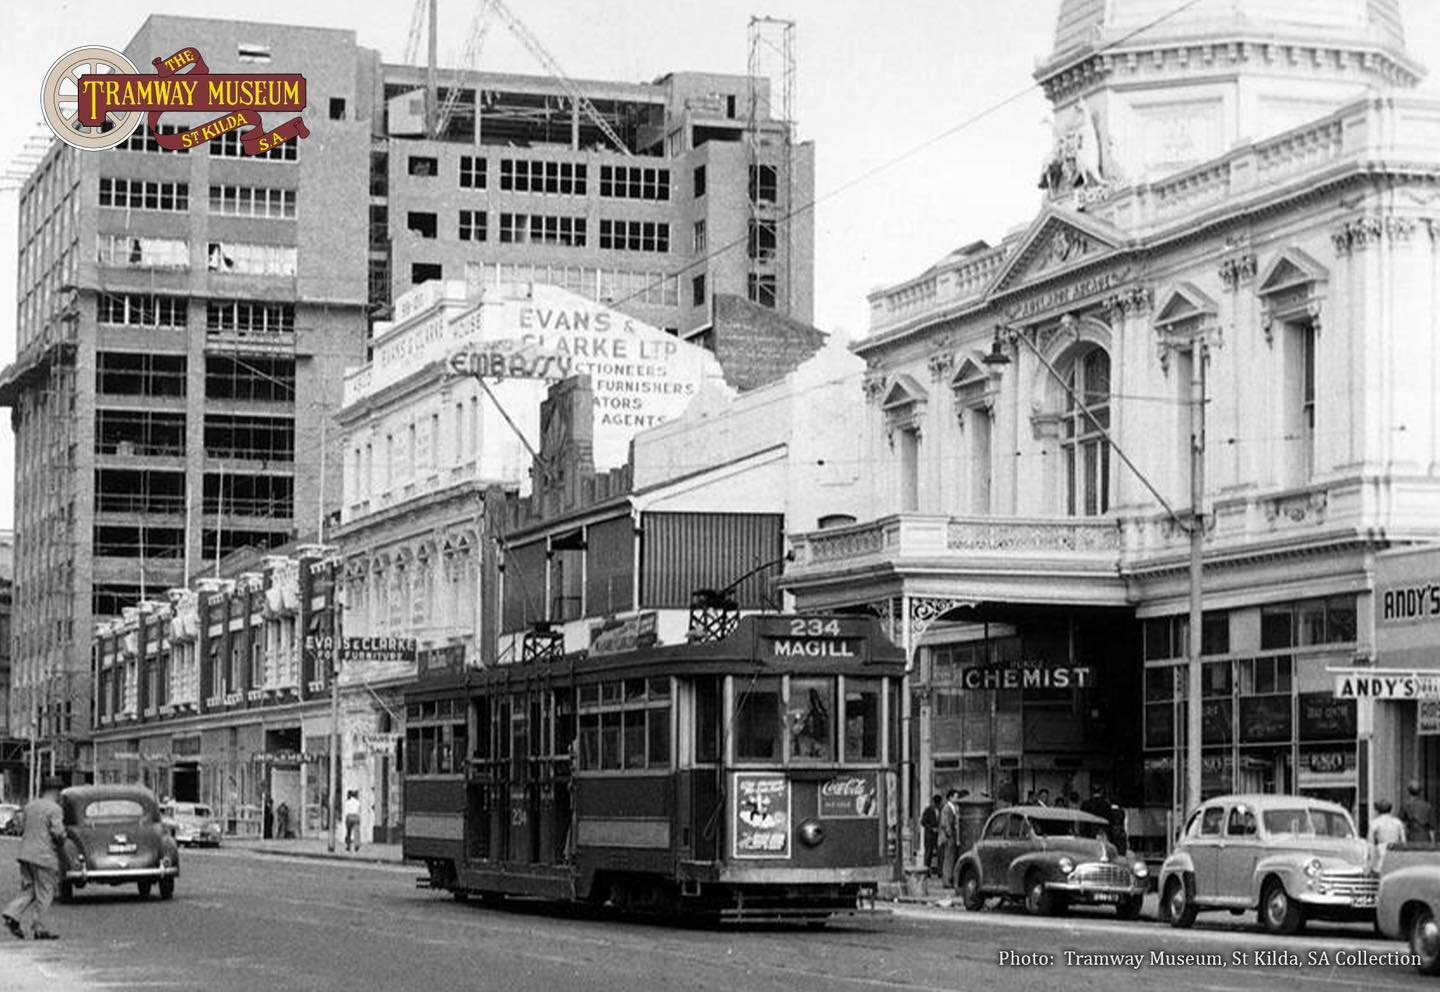 Happy #Throwback Thursday!

Here we have busy Grenfell Street as it appeared in 1954. F-Type &lsquo;dropcentre&rsquo; tram No. 234 trundles east, bound for Magill and likely having come from Richmond. Adelaide Arcade stands proudly in the background.